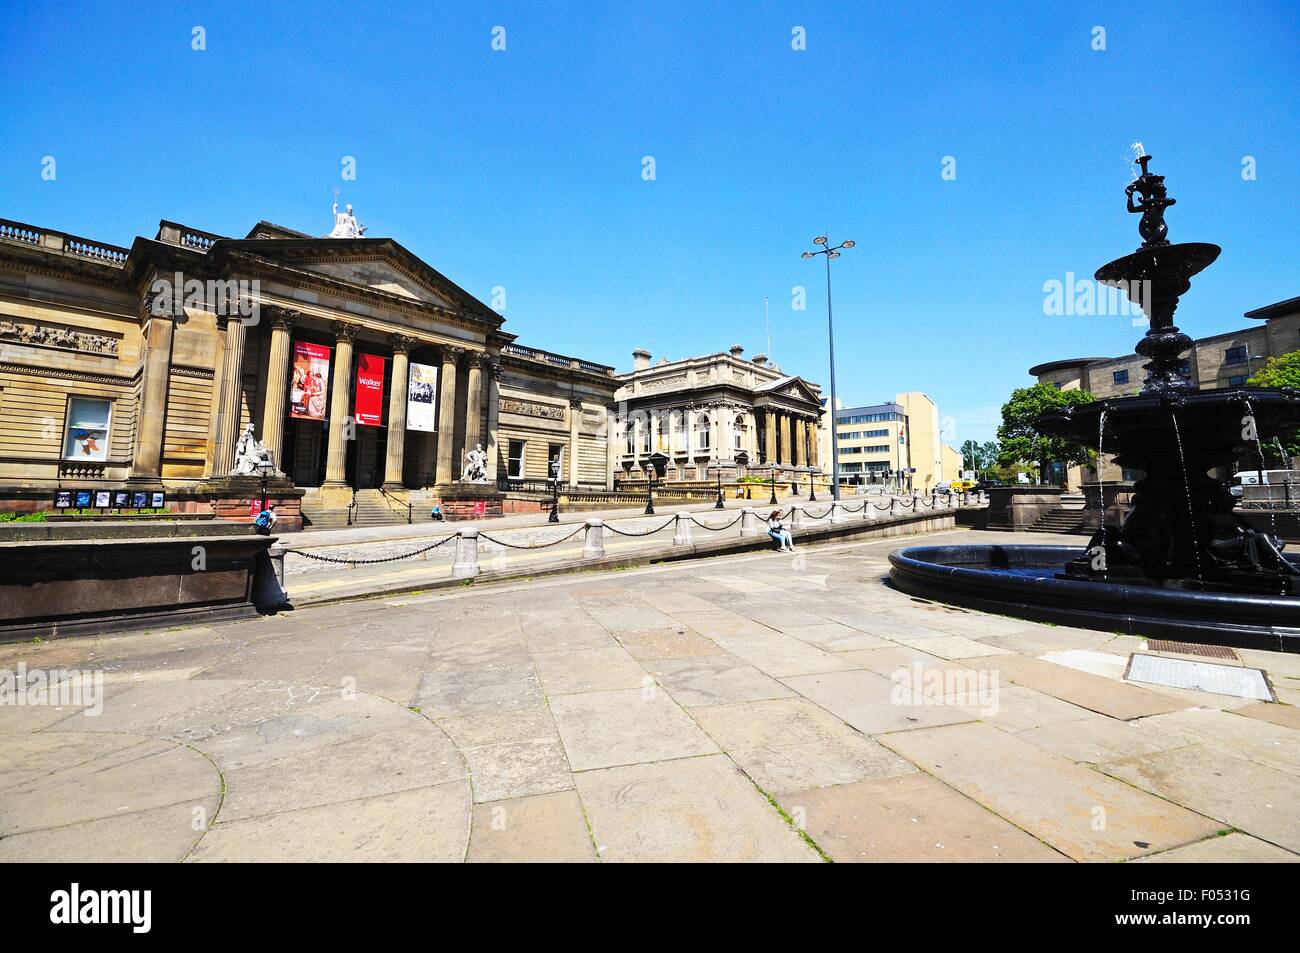 Walker Art Gallery with the Steble fountain in the foreground, Liverpool, Merseyside, England, UK, Western Europe. Stock Photo